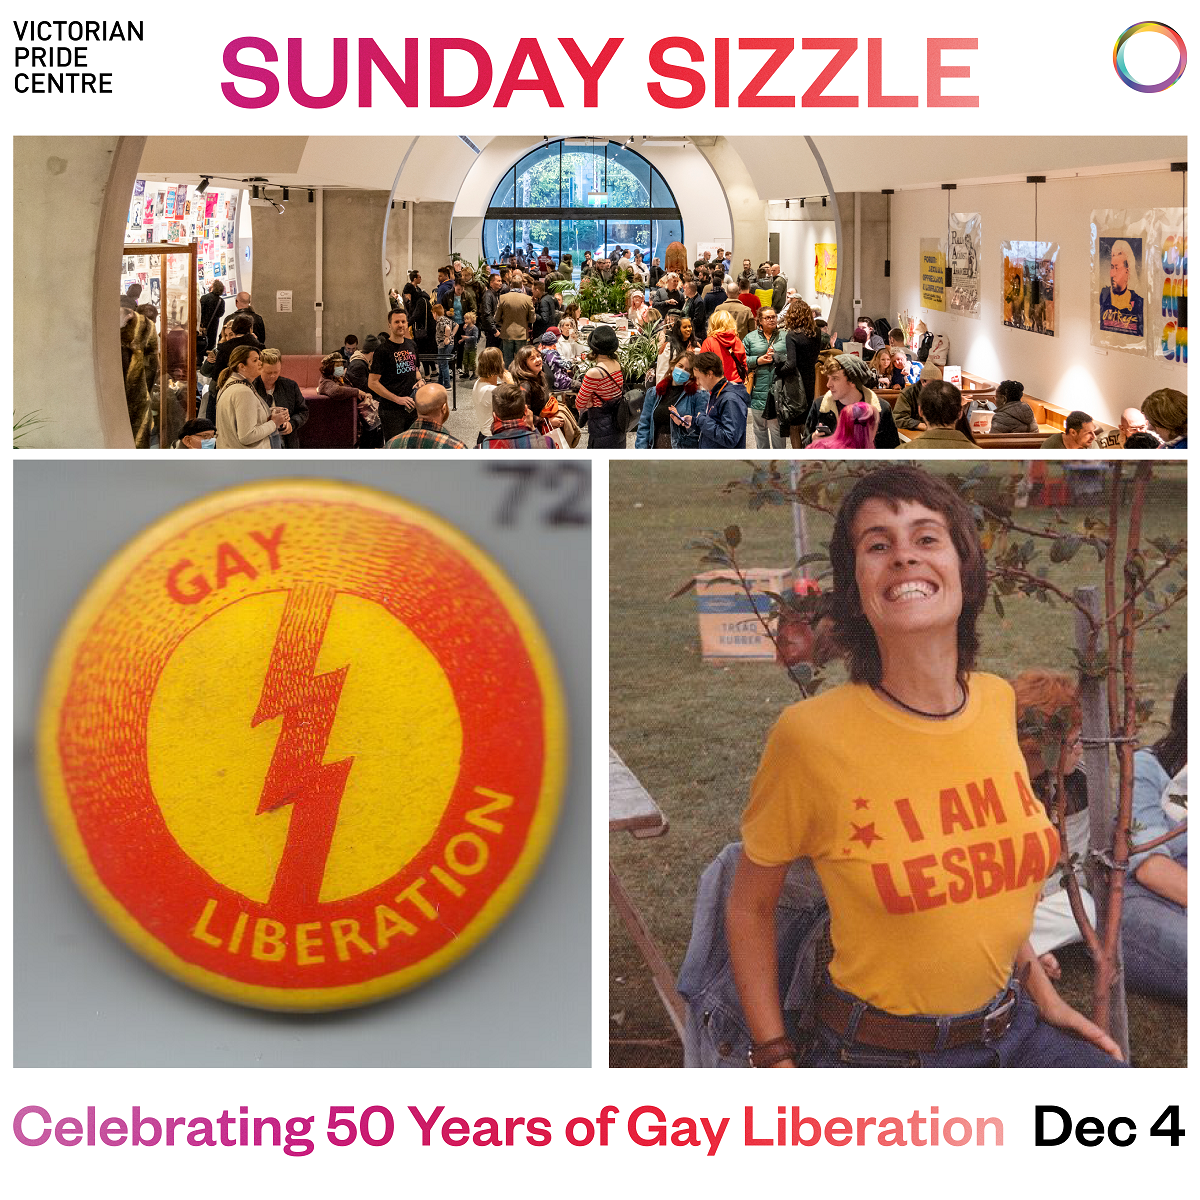 Image collage of Sunday Sizzle activities